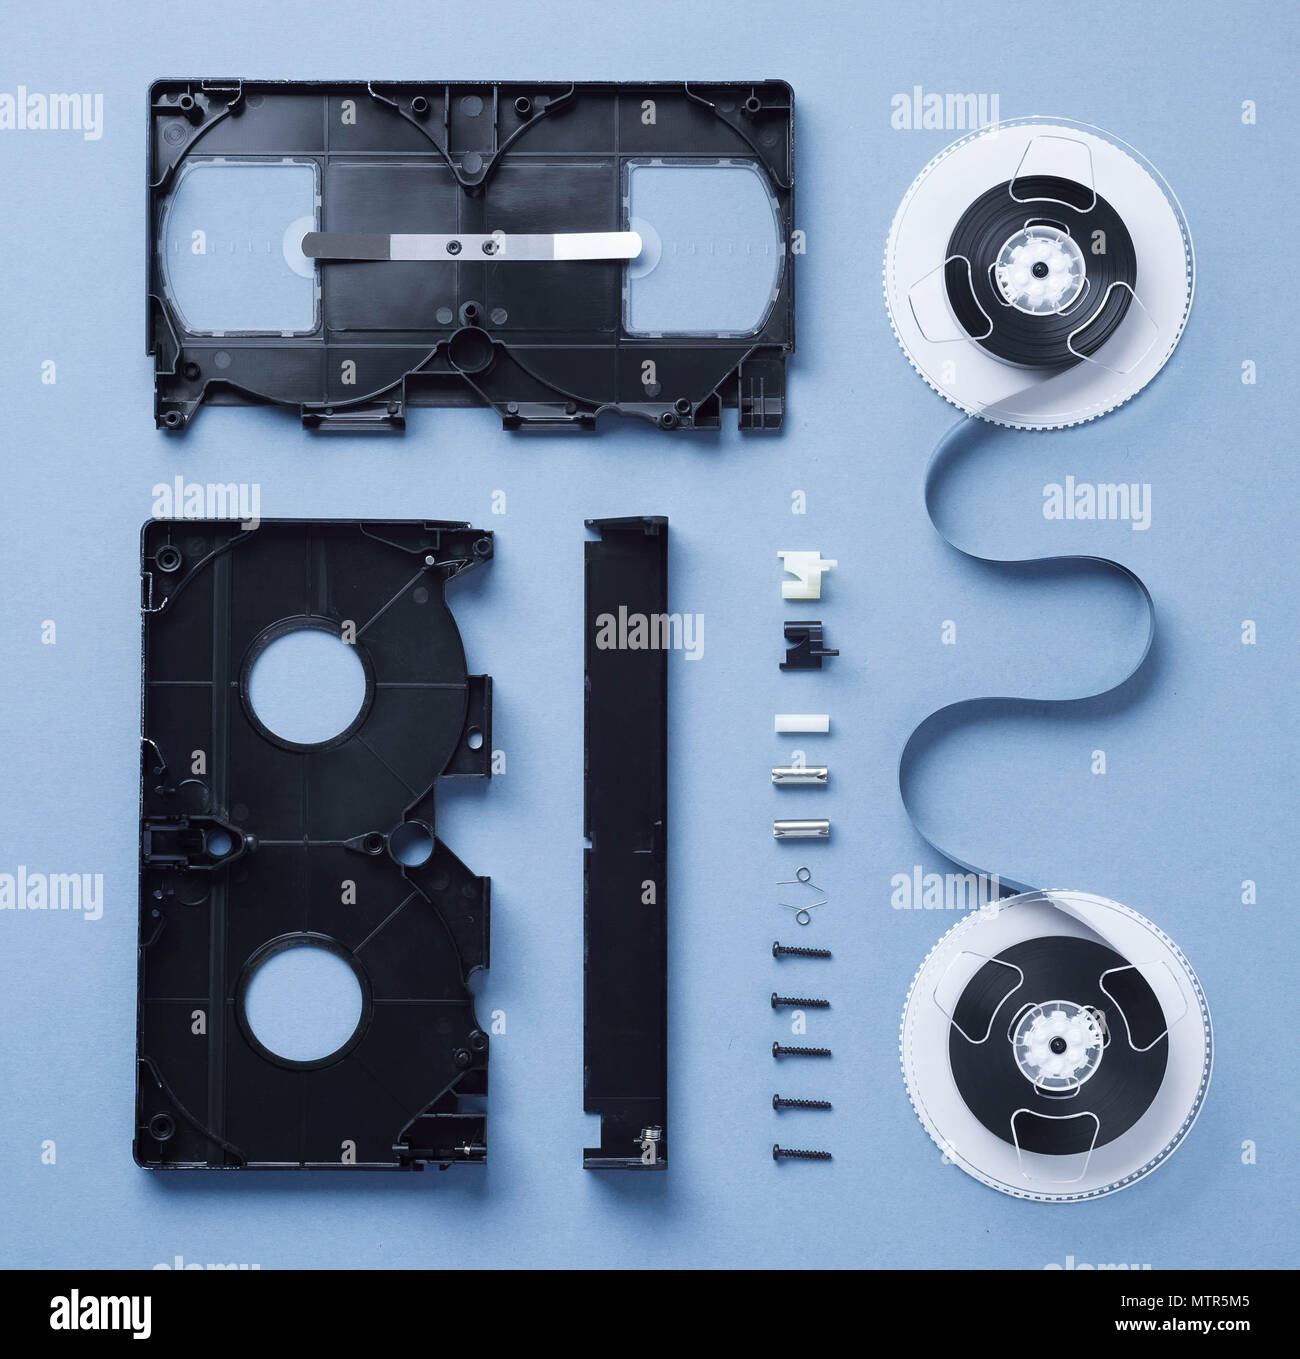 Components of a VHS Cassette disassembled and well arranged over blue  background Stock Photo - Alamy